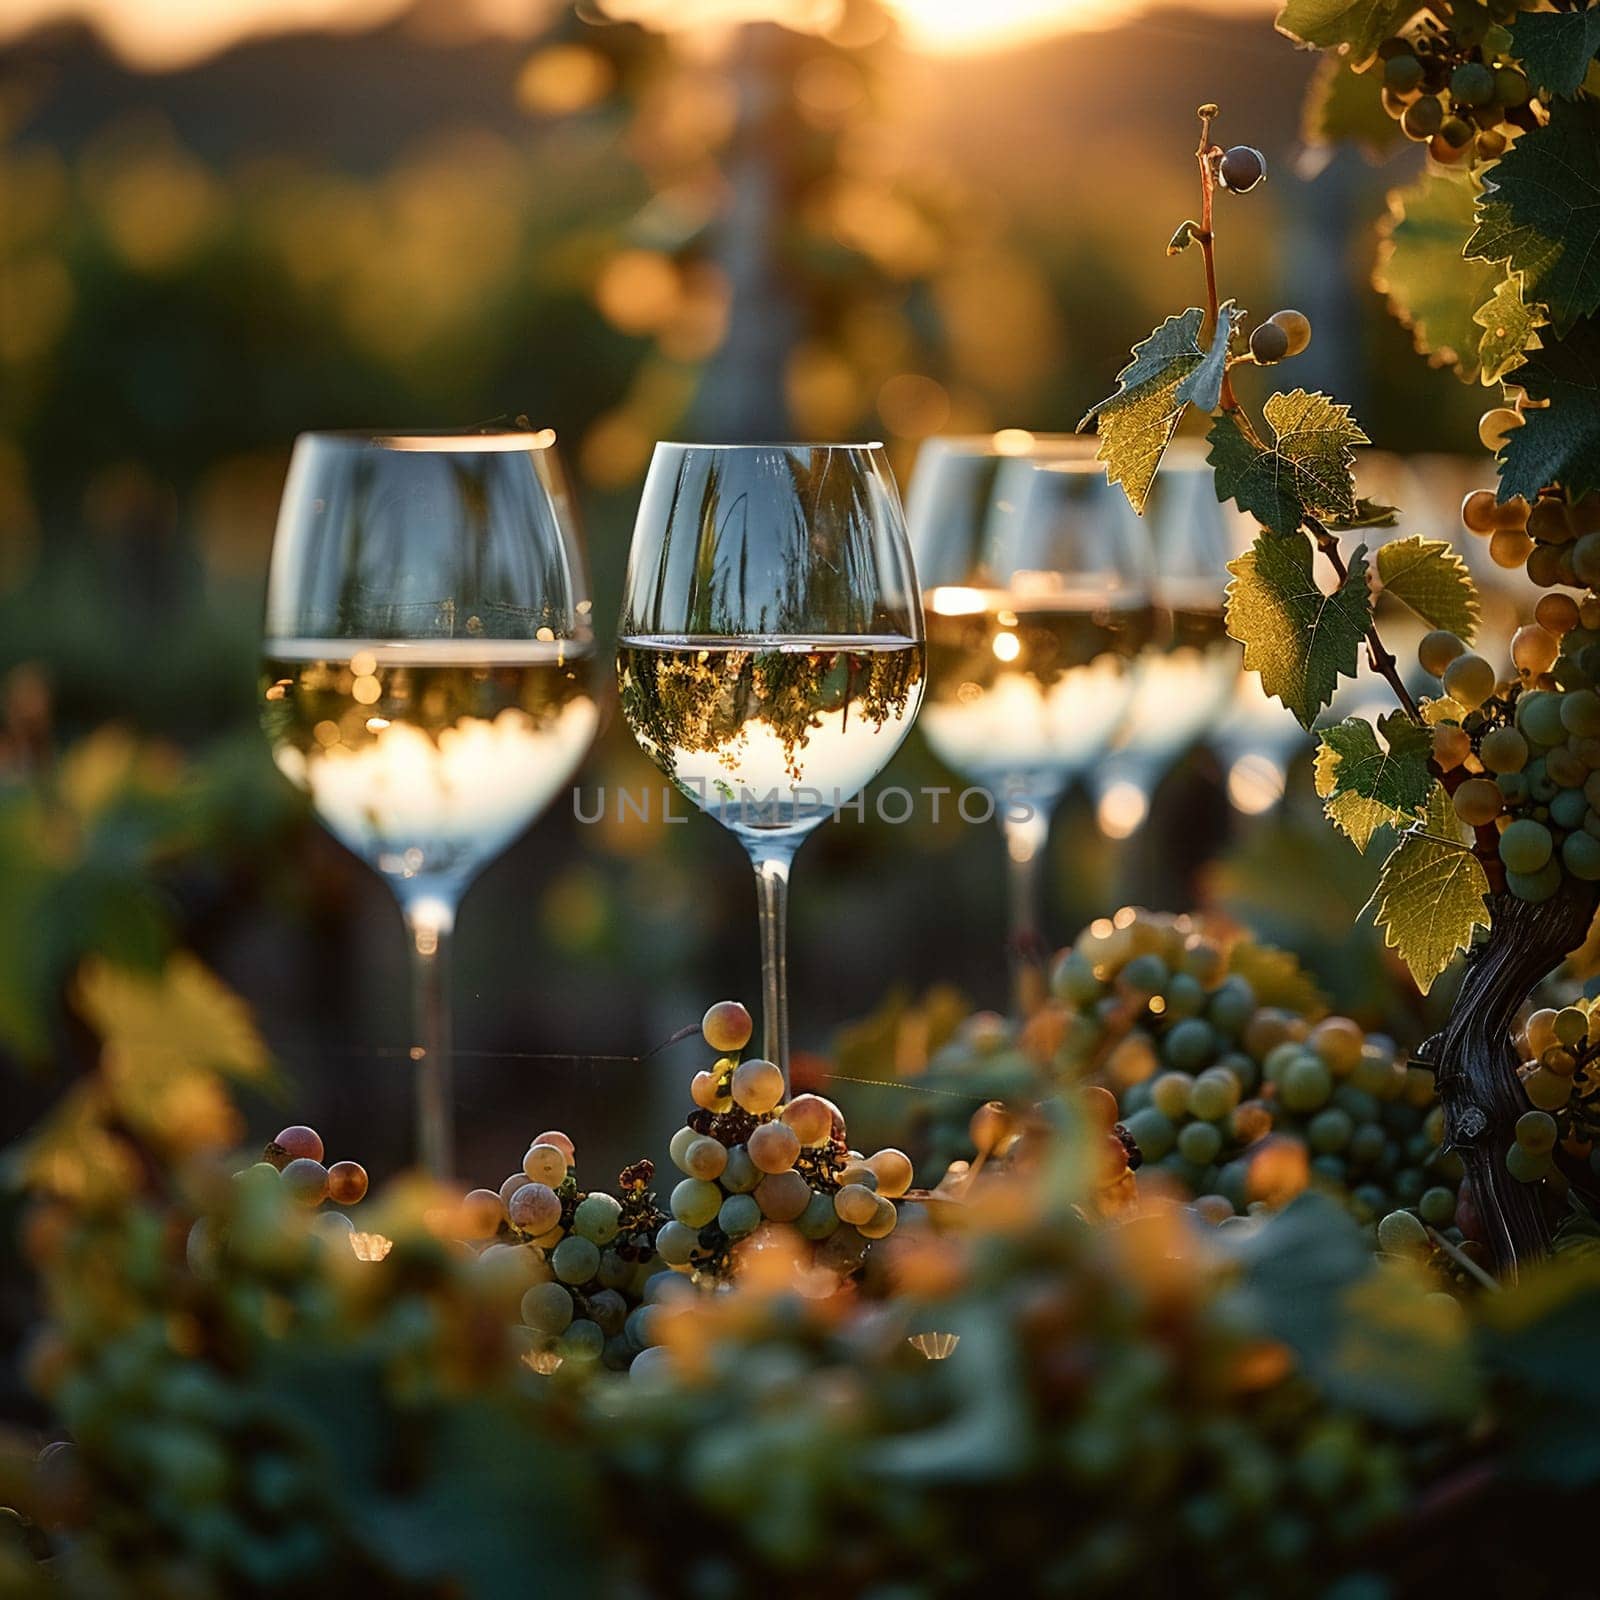 Sophisticated Wine Tasting Event with a Blur of Toasting Glasses, The clinking of glasses in a hazy vineyard setting evokes a sense of celebration.